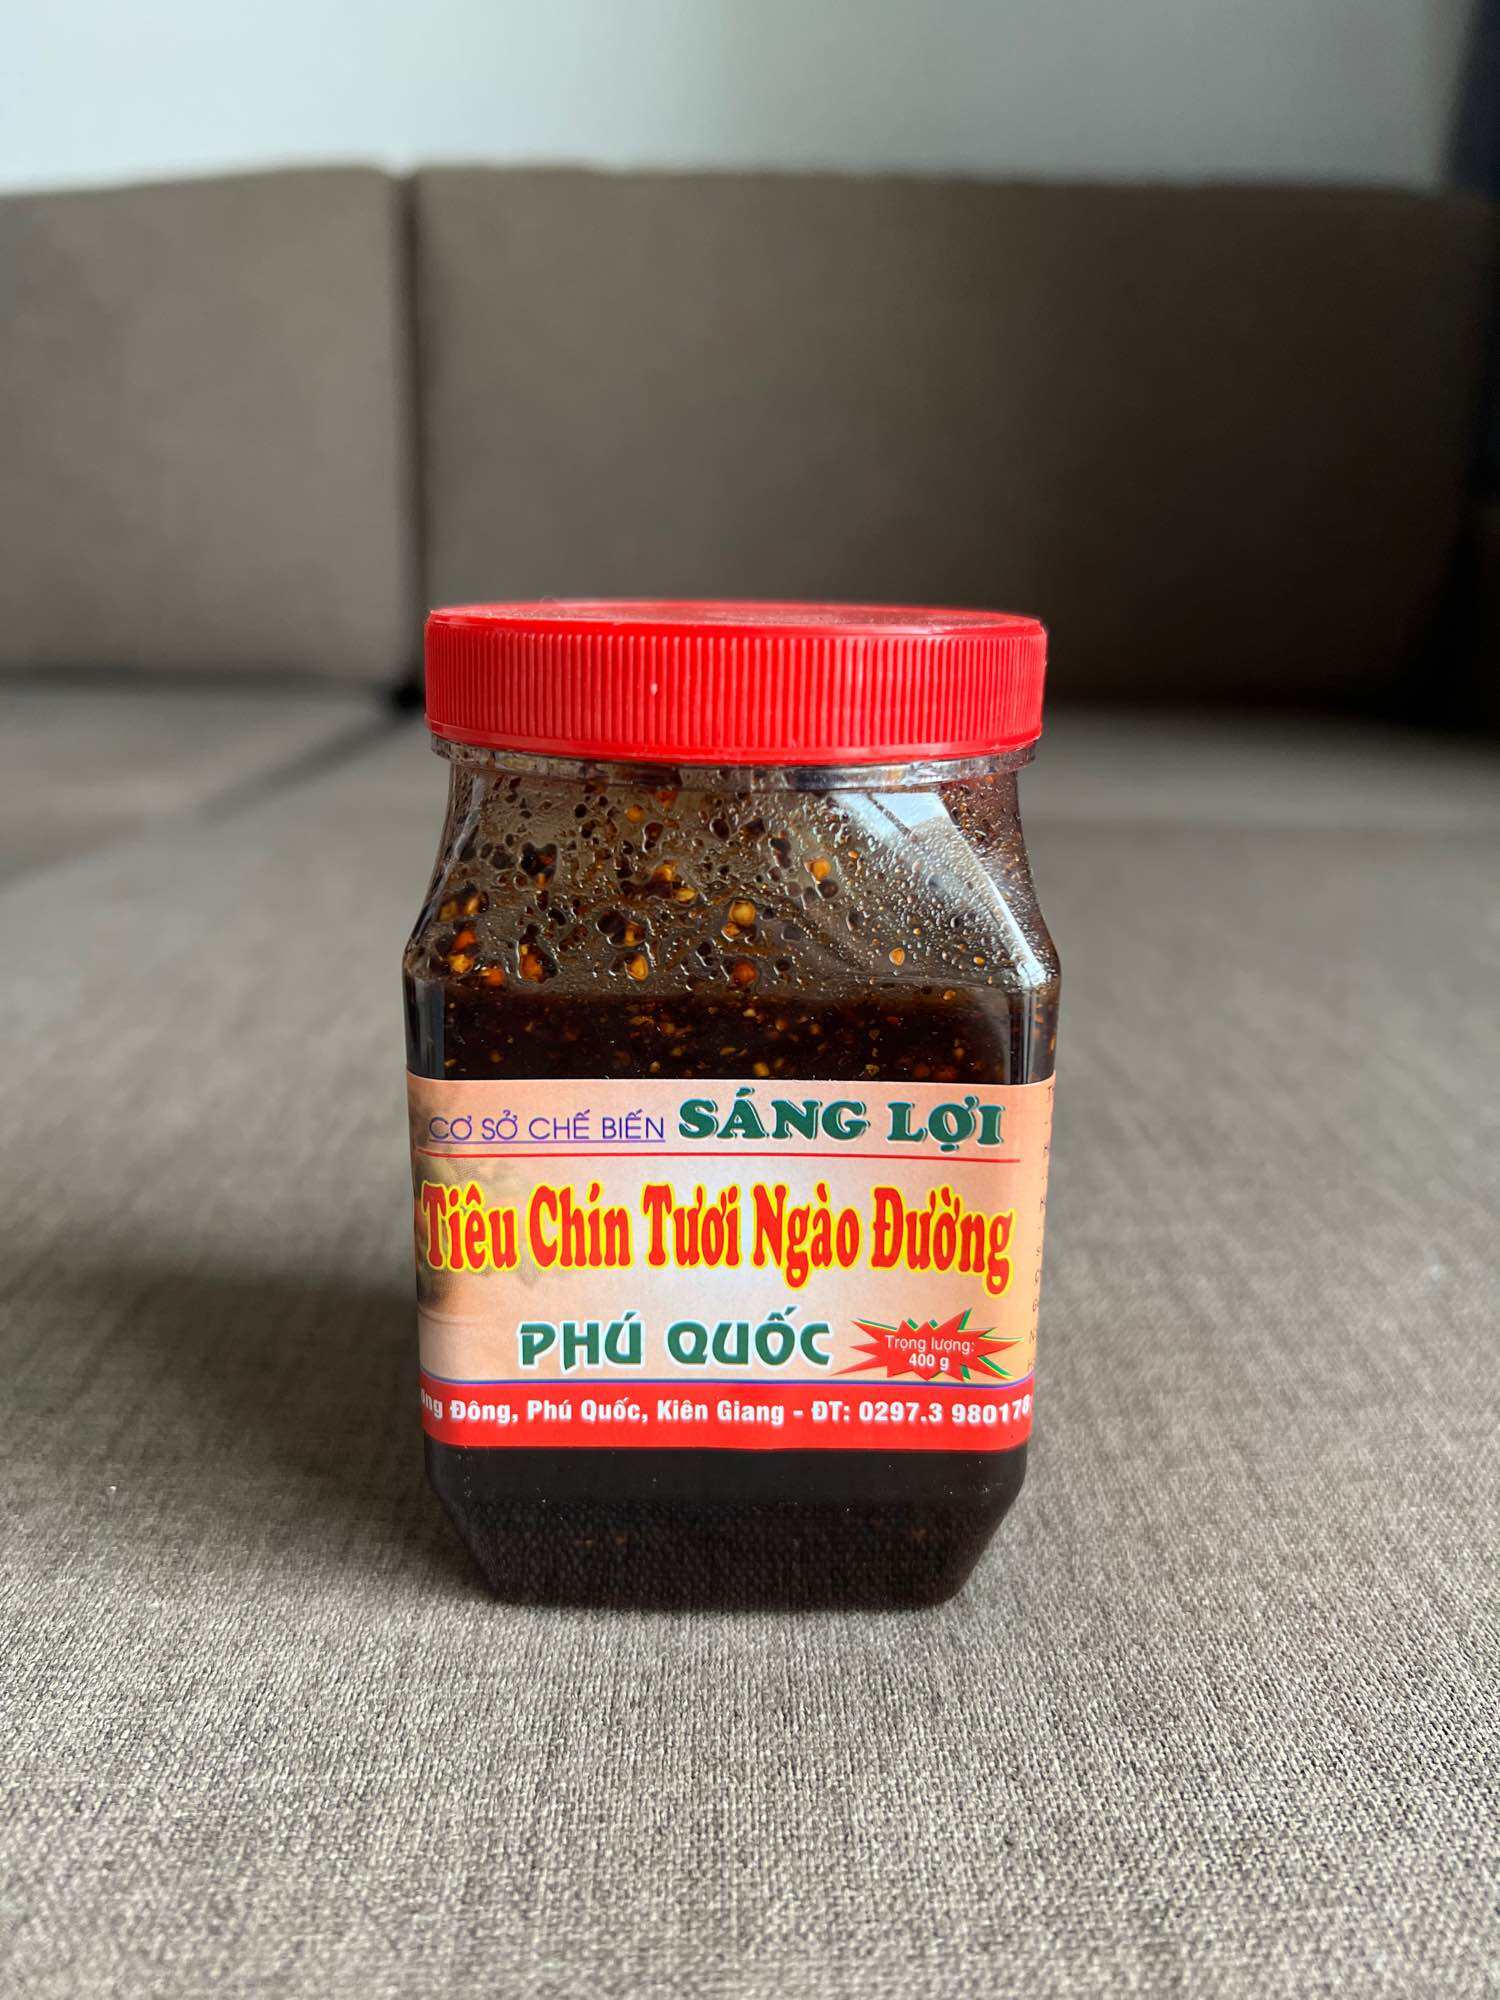 SÁNG LỢI Pepper with fish sauce 400g